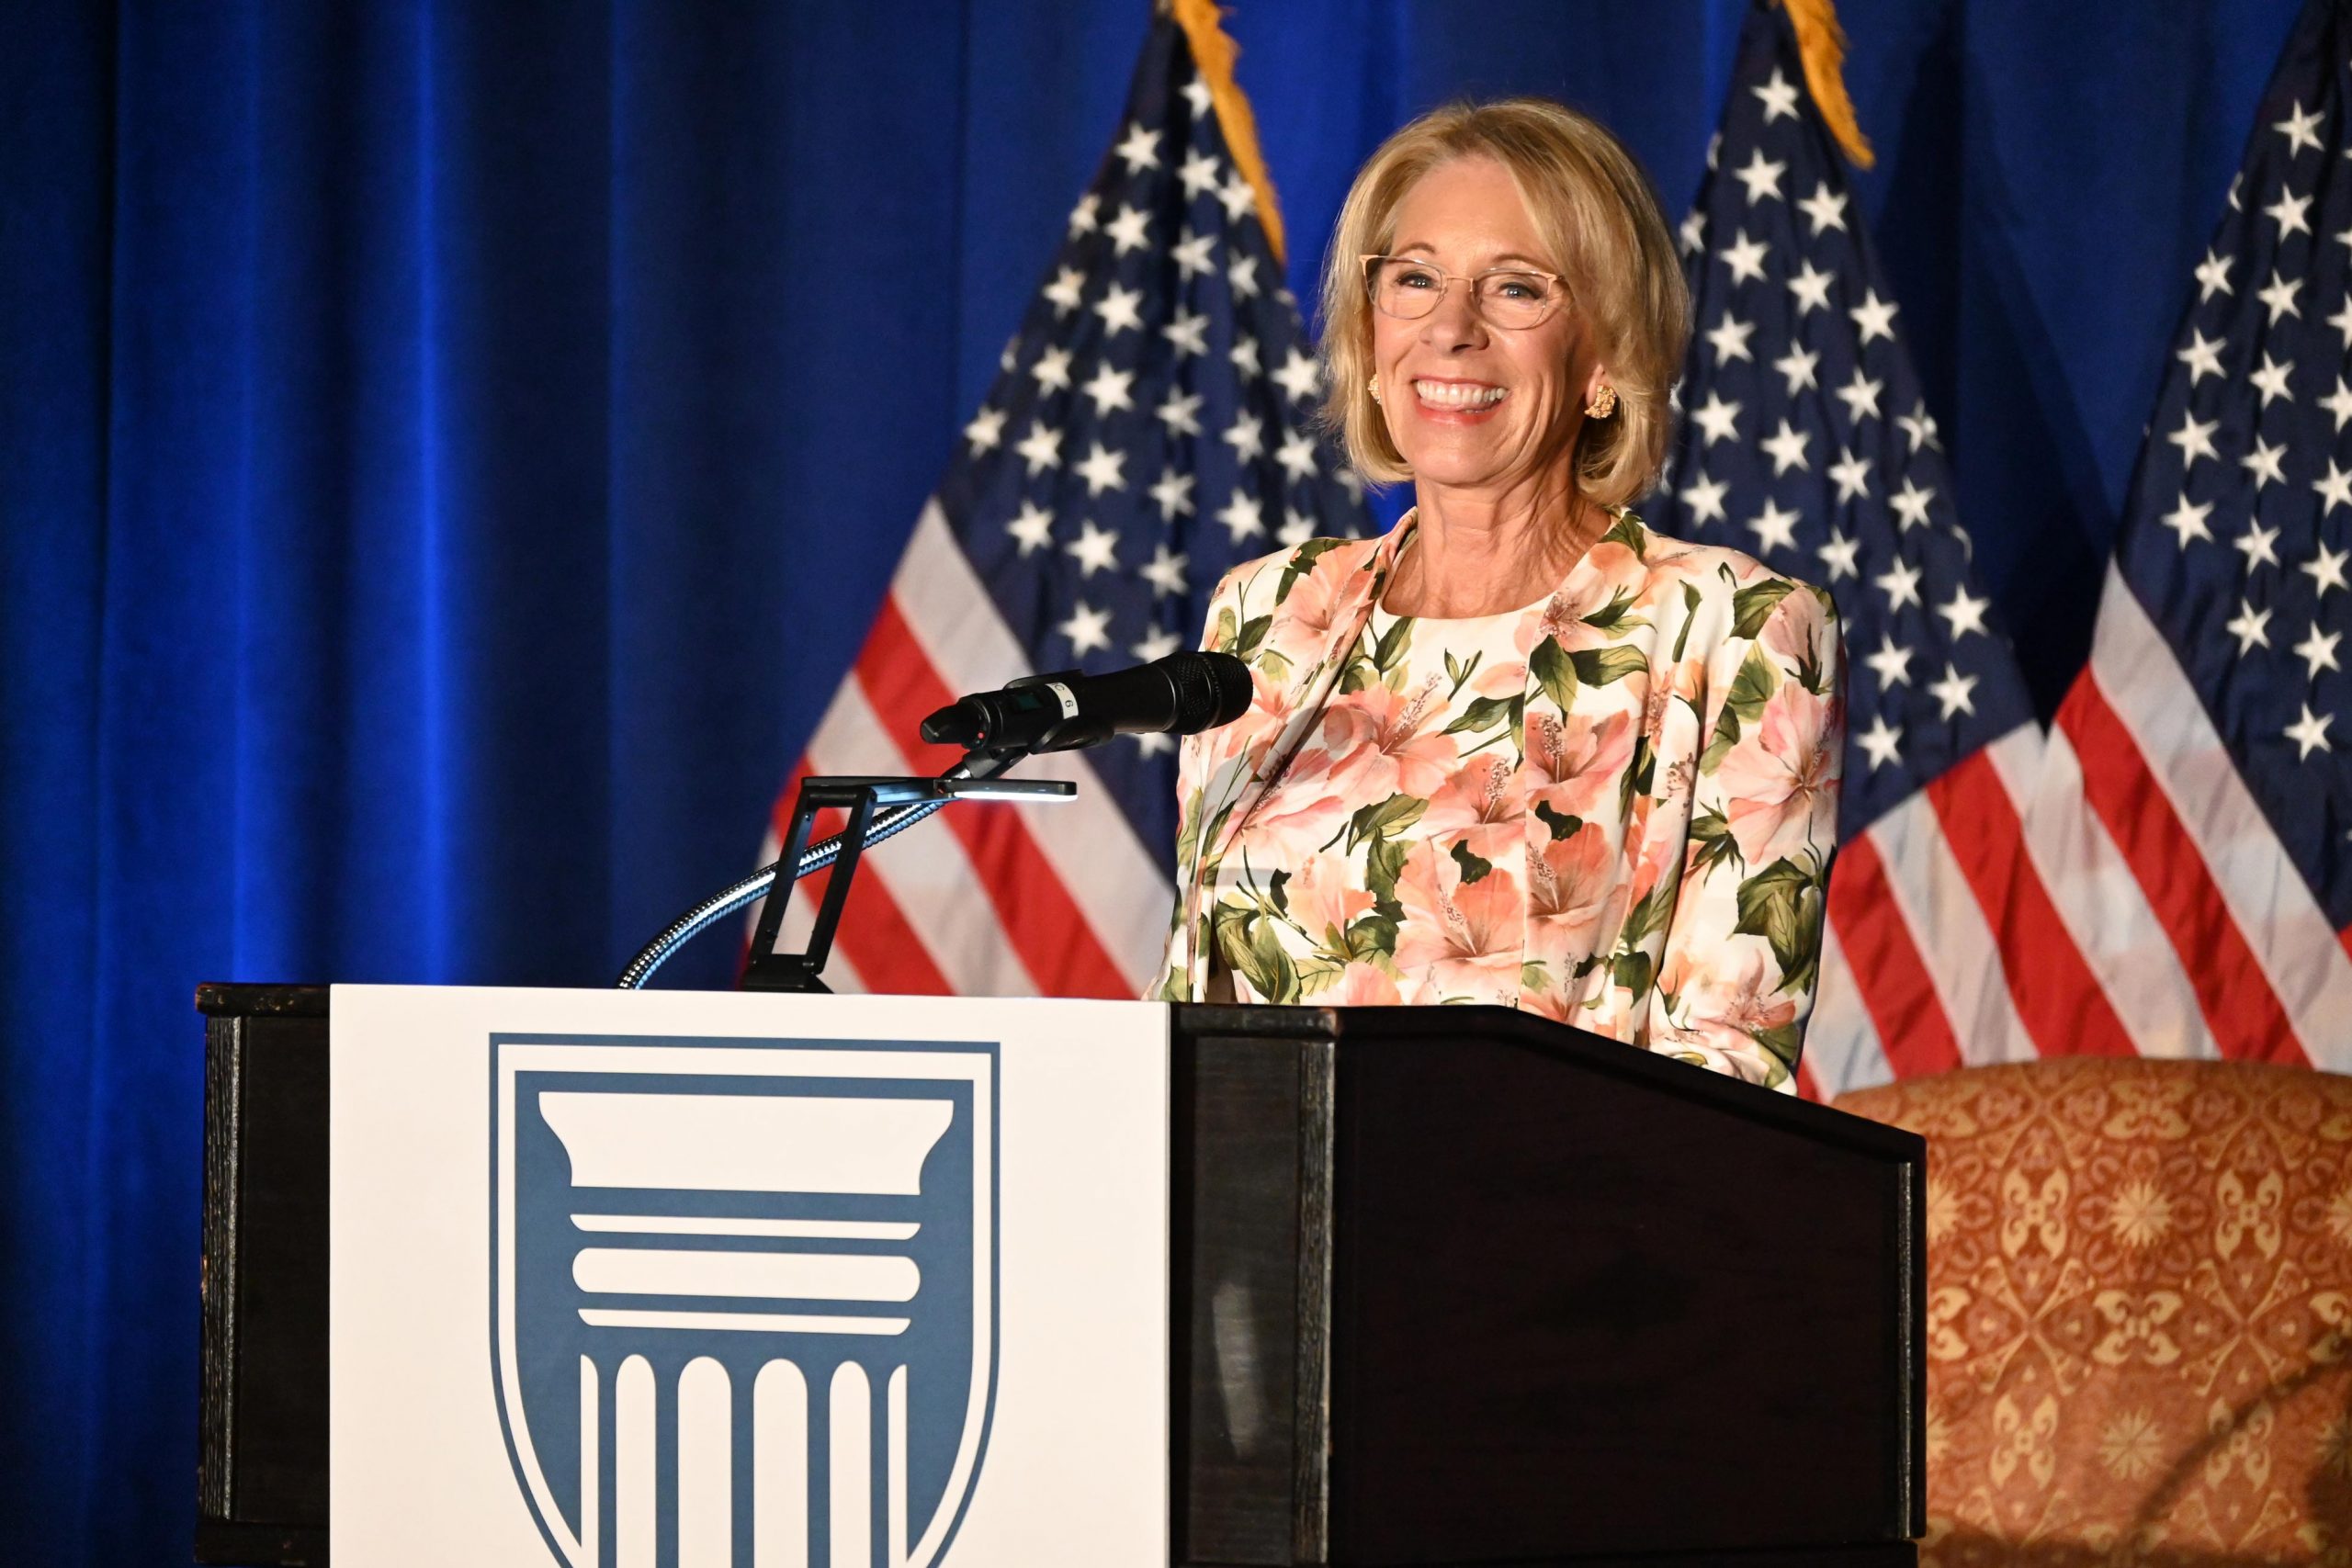 Education Policy Update with Secretary Betsy DeVos